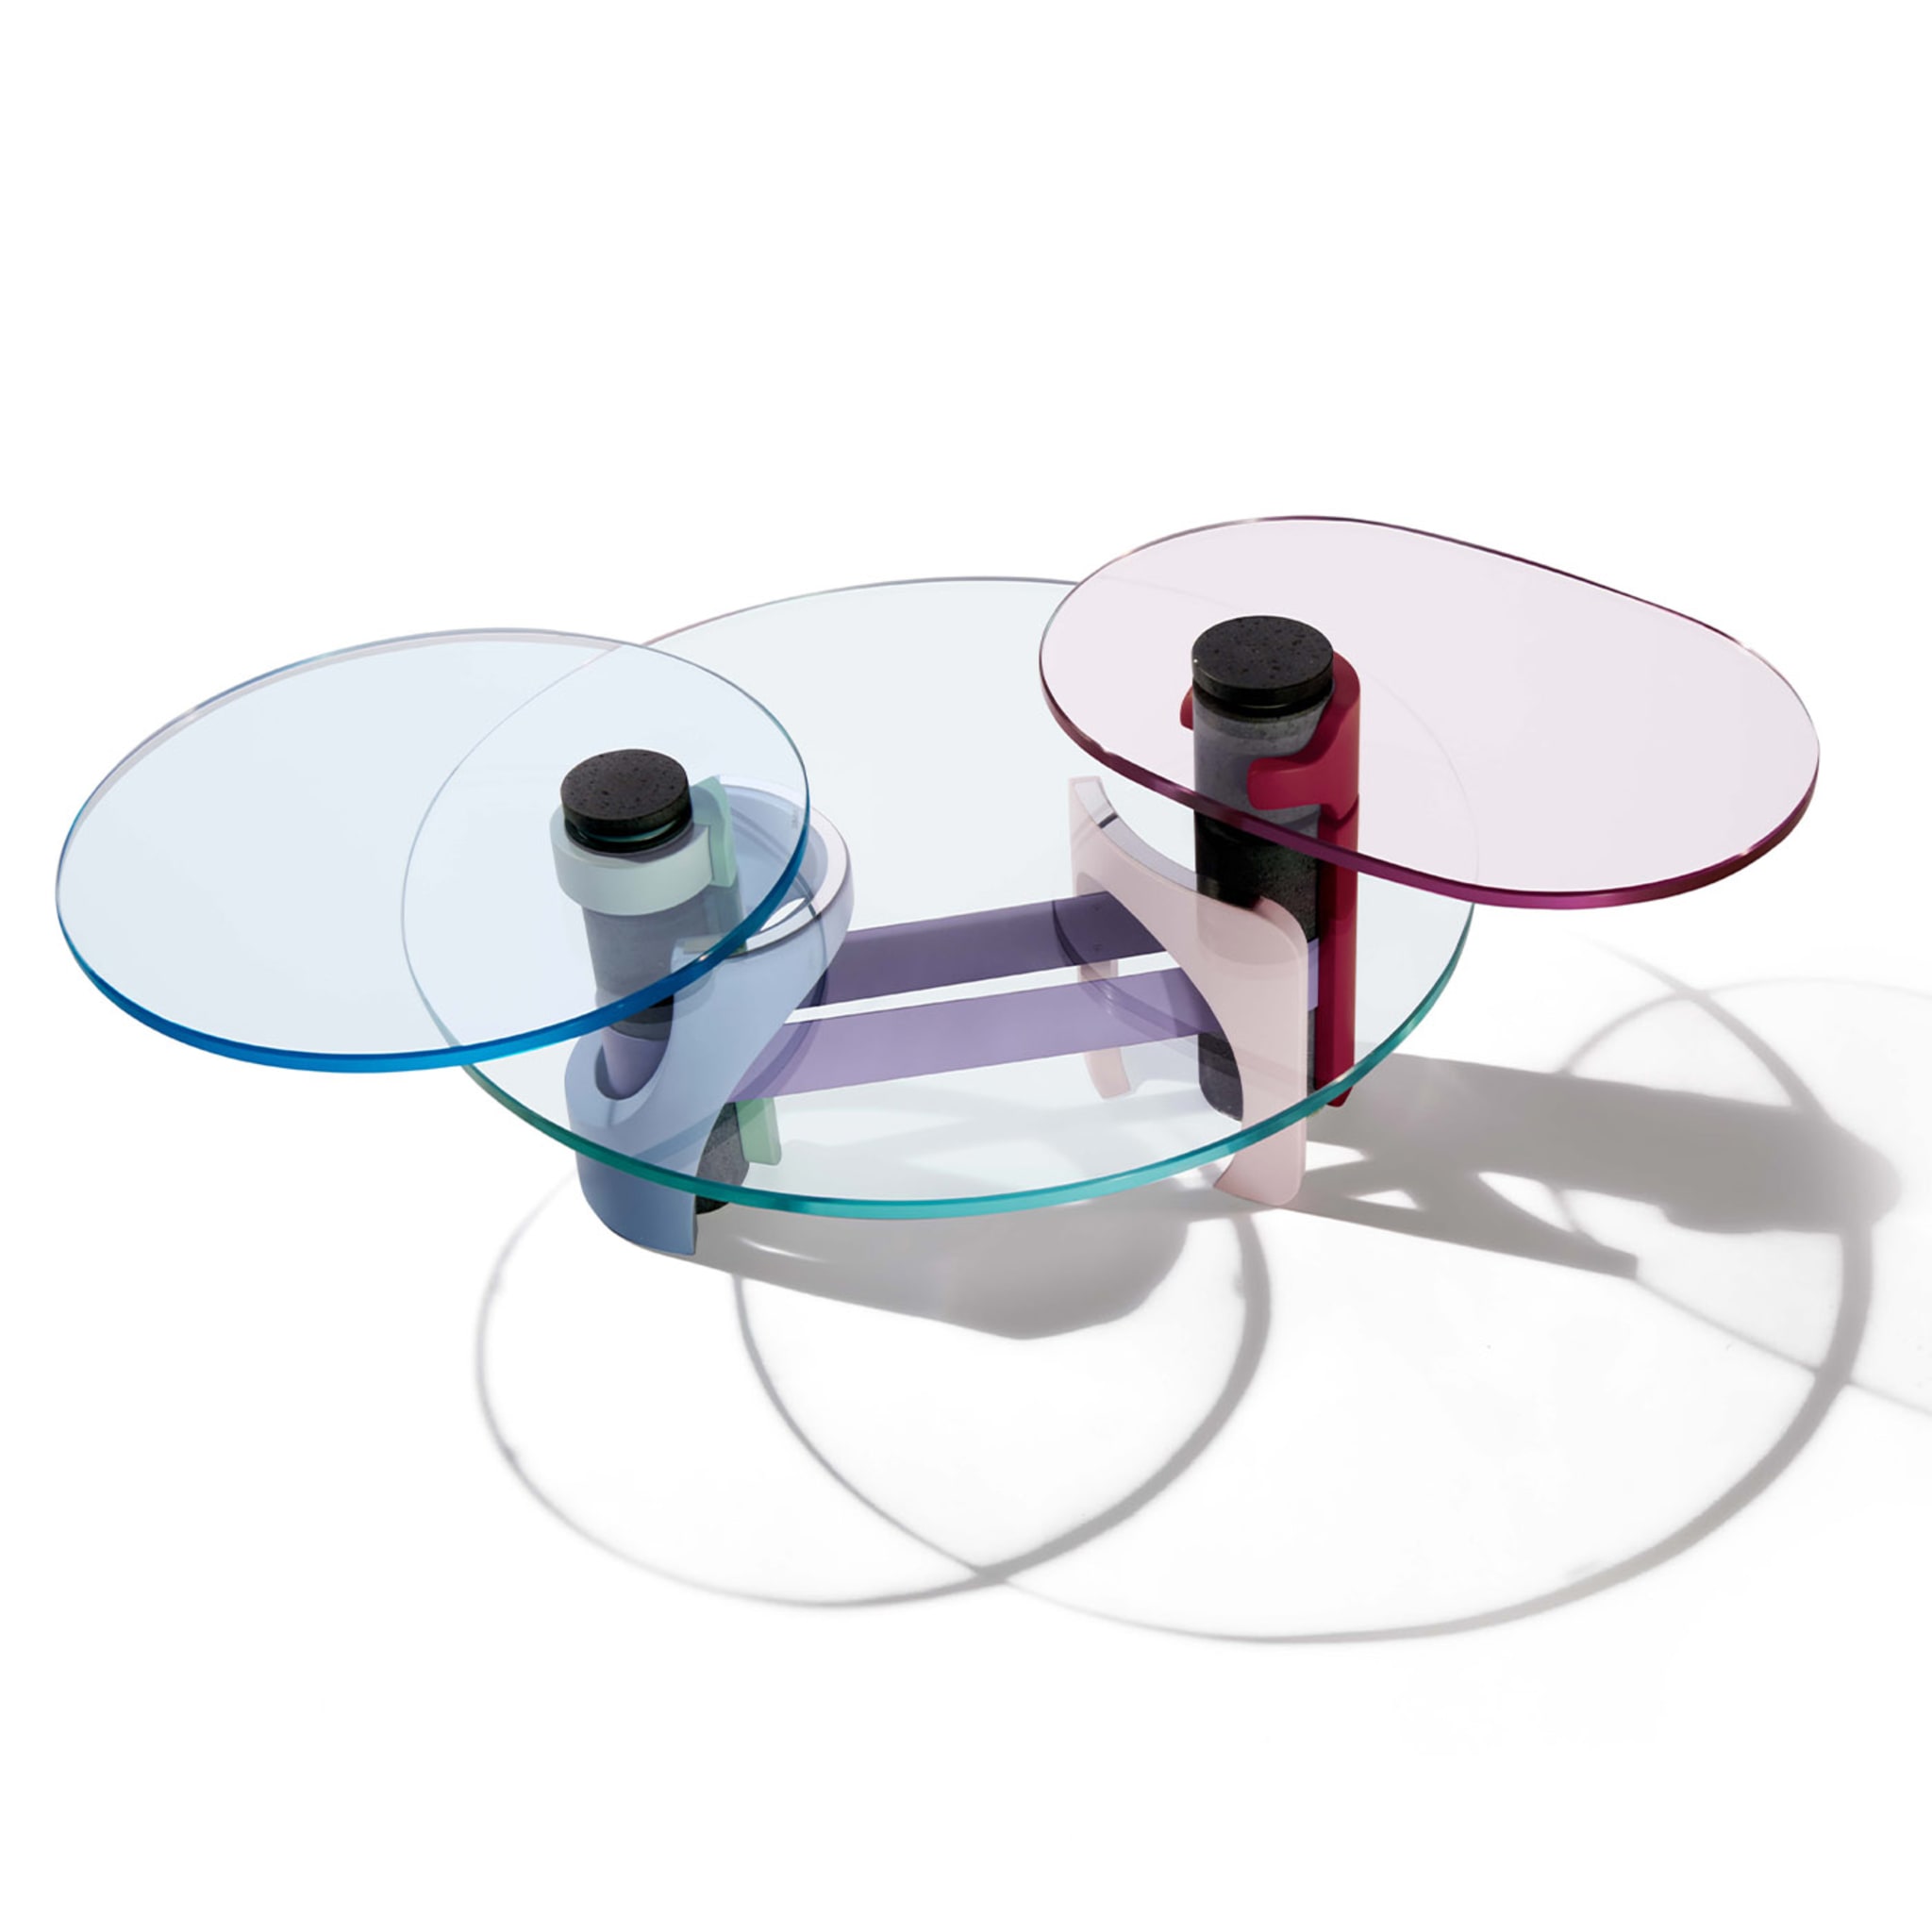 Efesto Sculptural Coffee Table Limited Edition by Elena Salmistraro Limited Edition - Alternative view 3